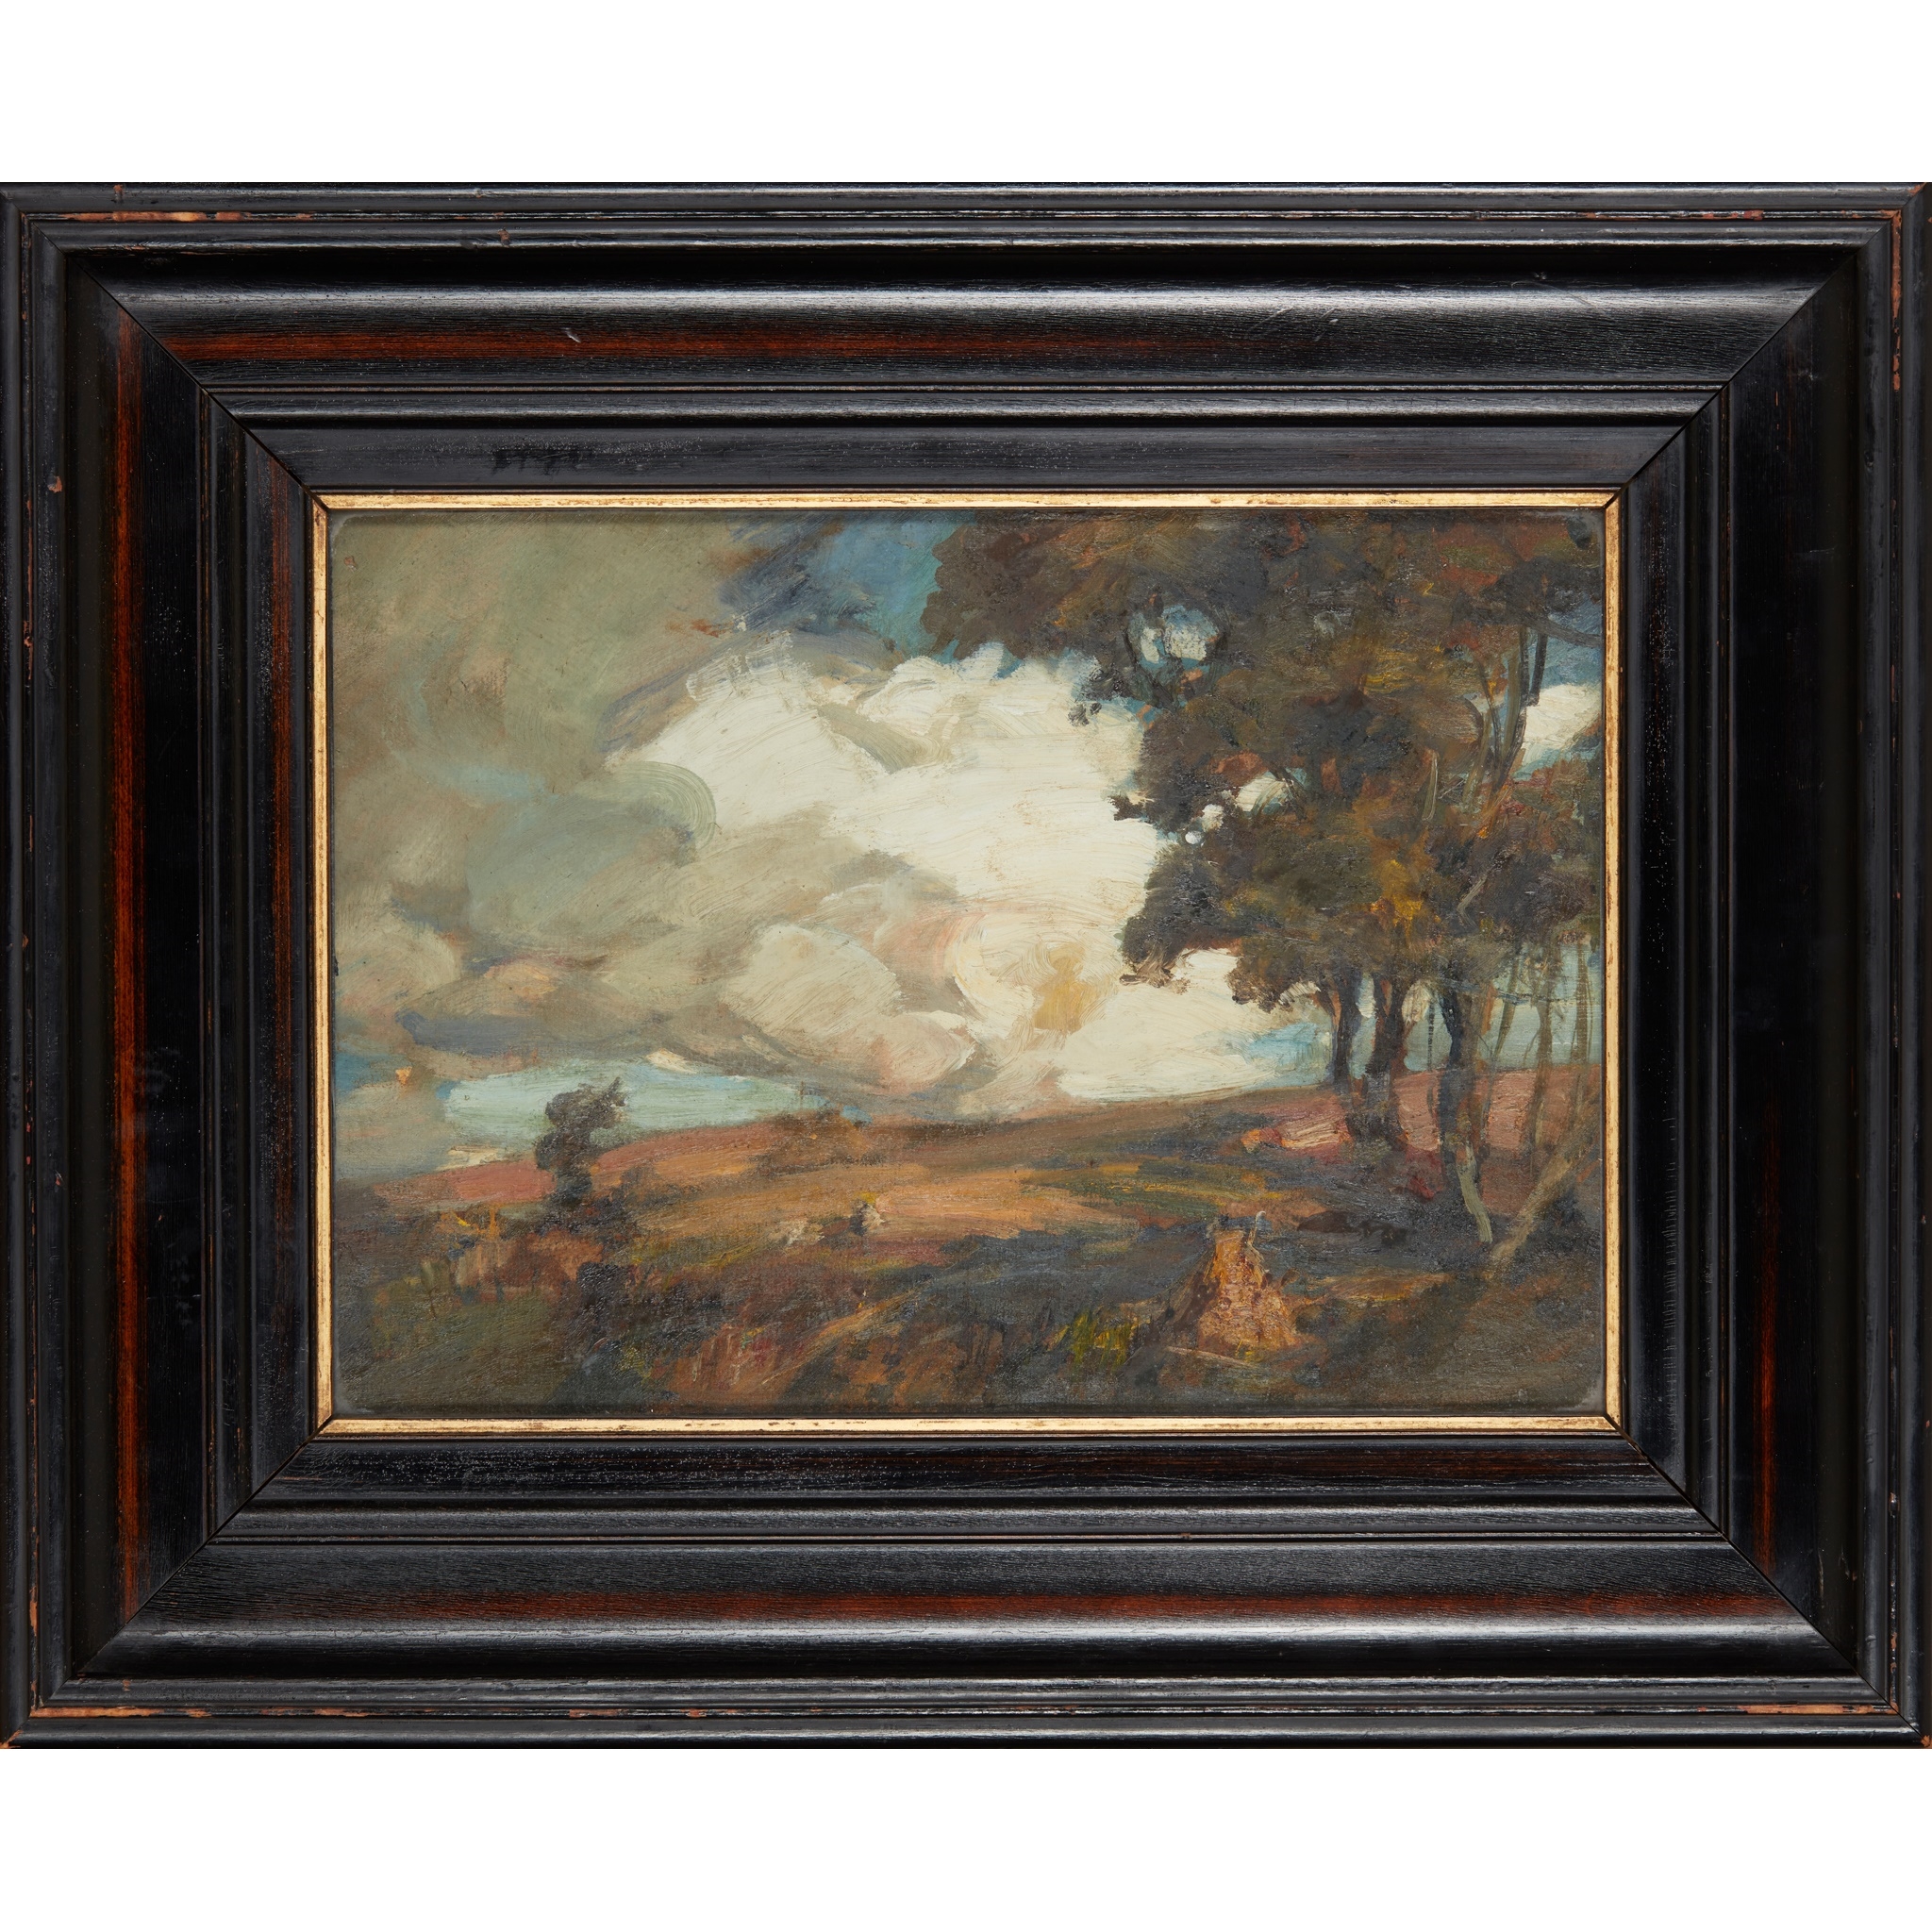 Artwork by James Campbell Noble, A BLUSTERY DAY, Made of Oil on board